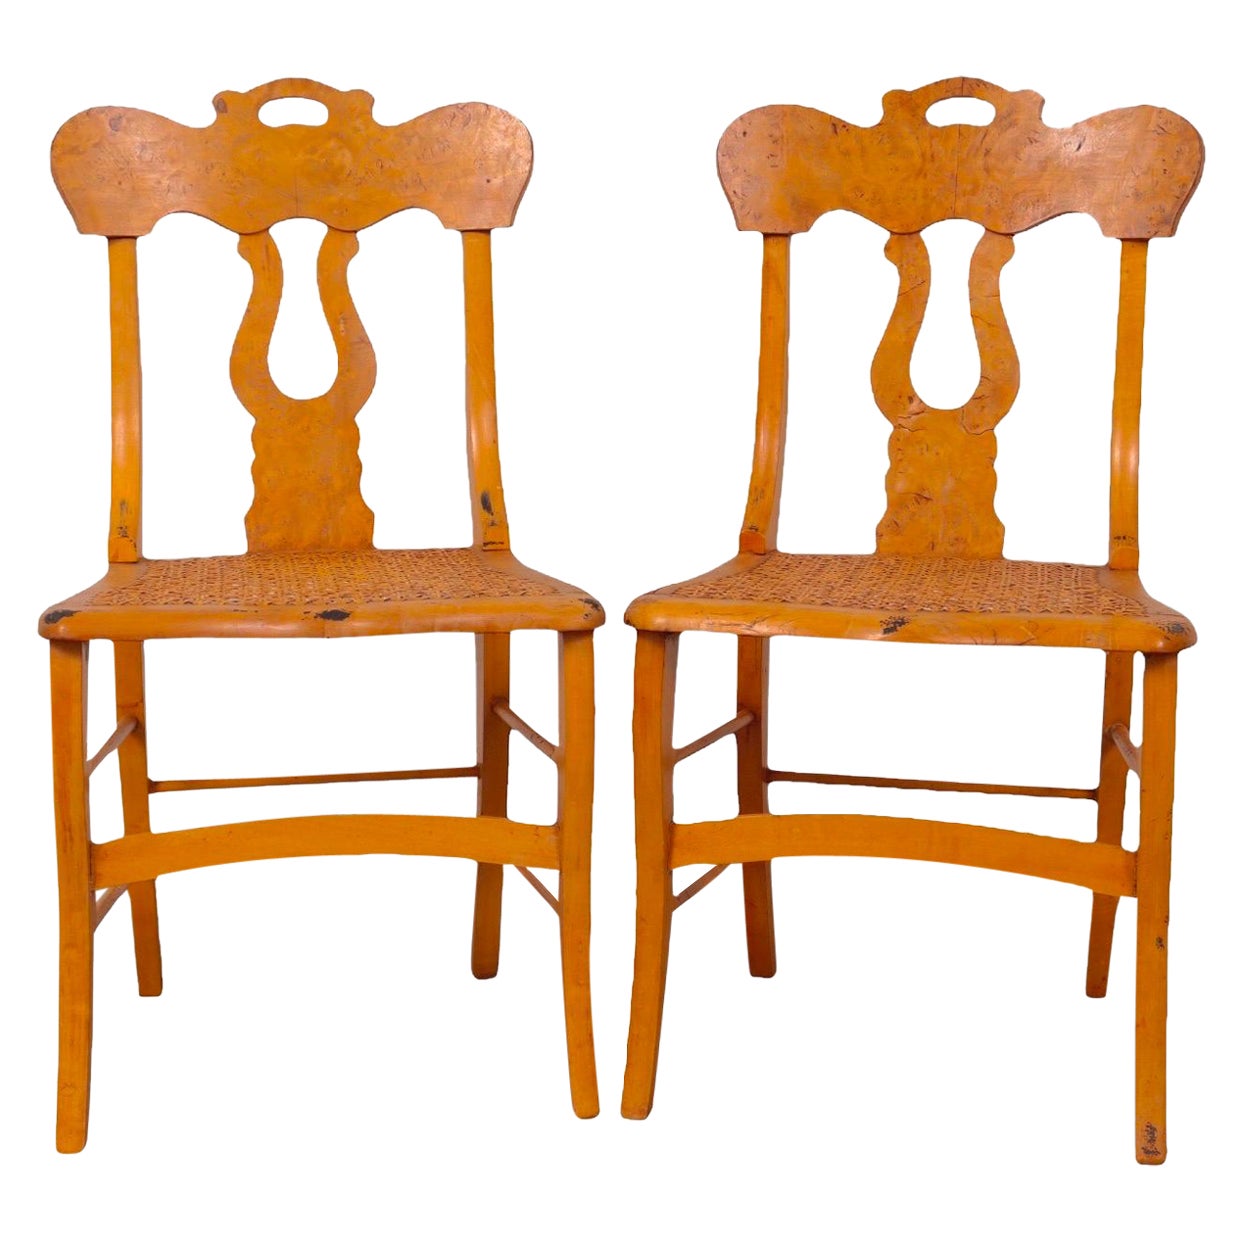 Antique Burlwood Caned Chairs, Pair